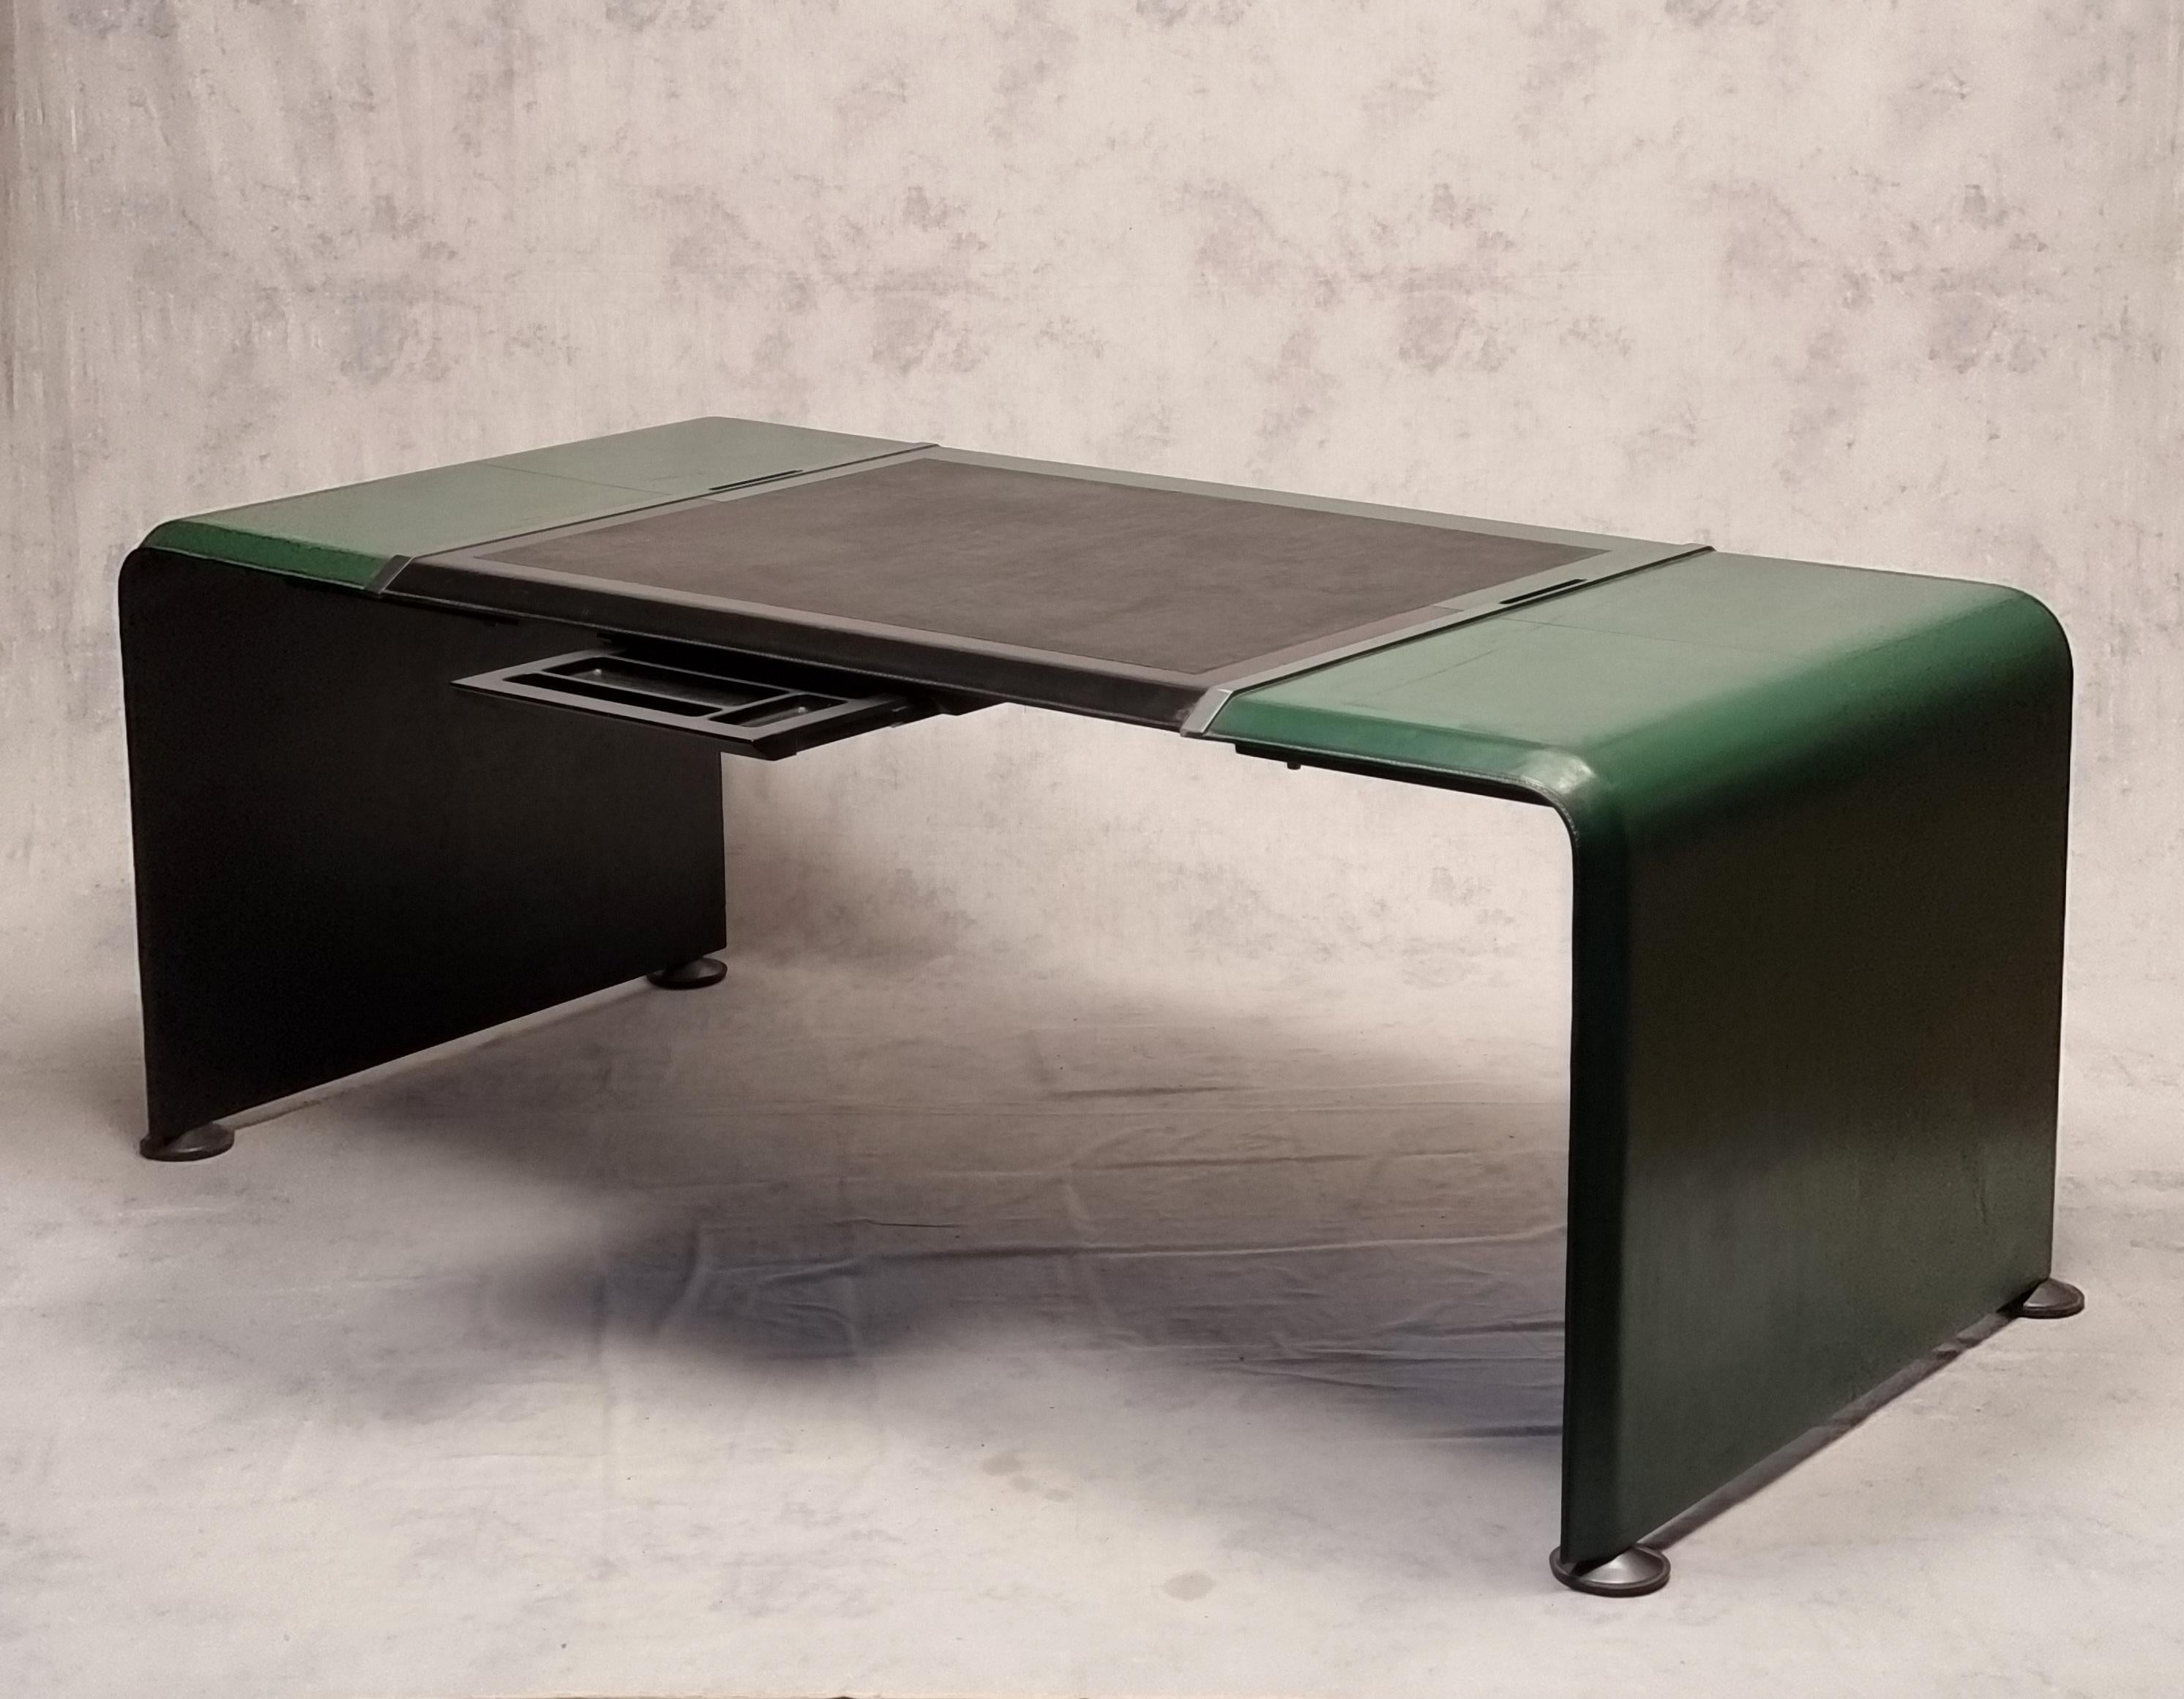 Very rare executive desk designed and published by Matteo Grassi. It is an exceptional piece, almost unique, entirely crafted in green leather on the exterior and black leather on the interior. This desk was published in the 1980s, at the peak of